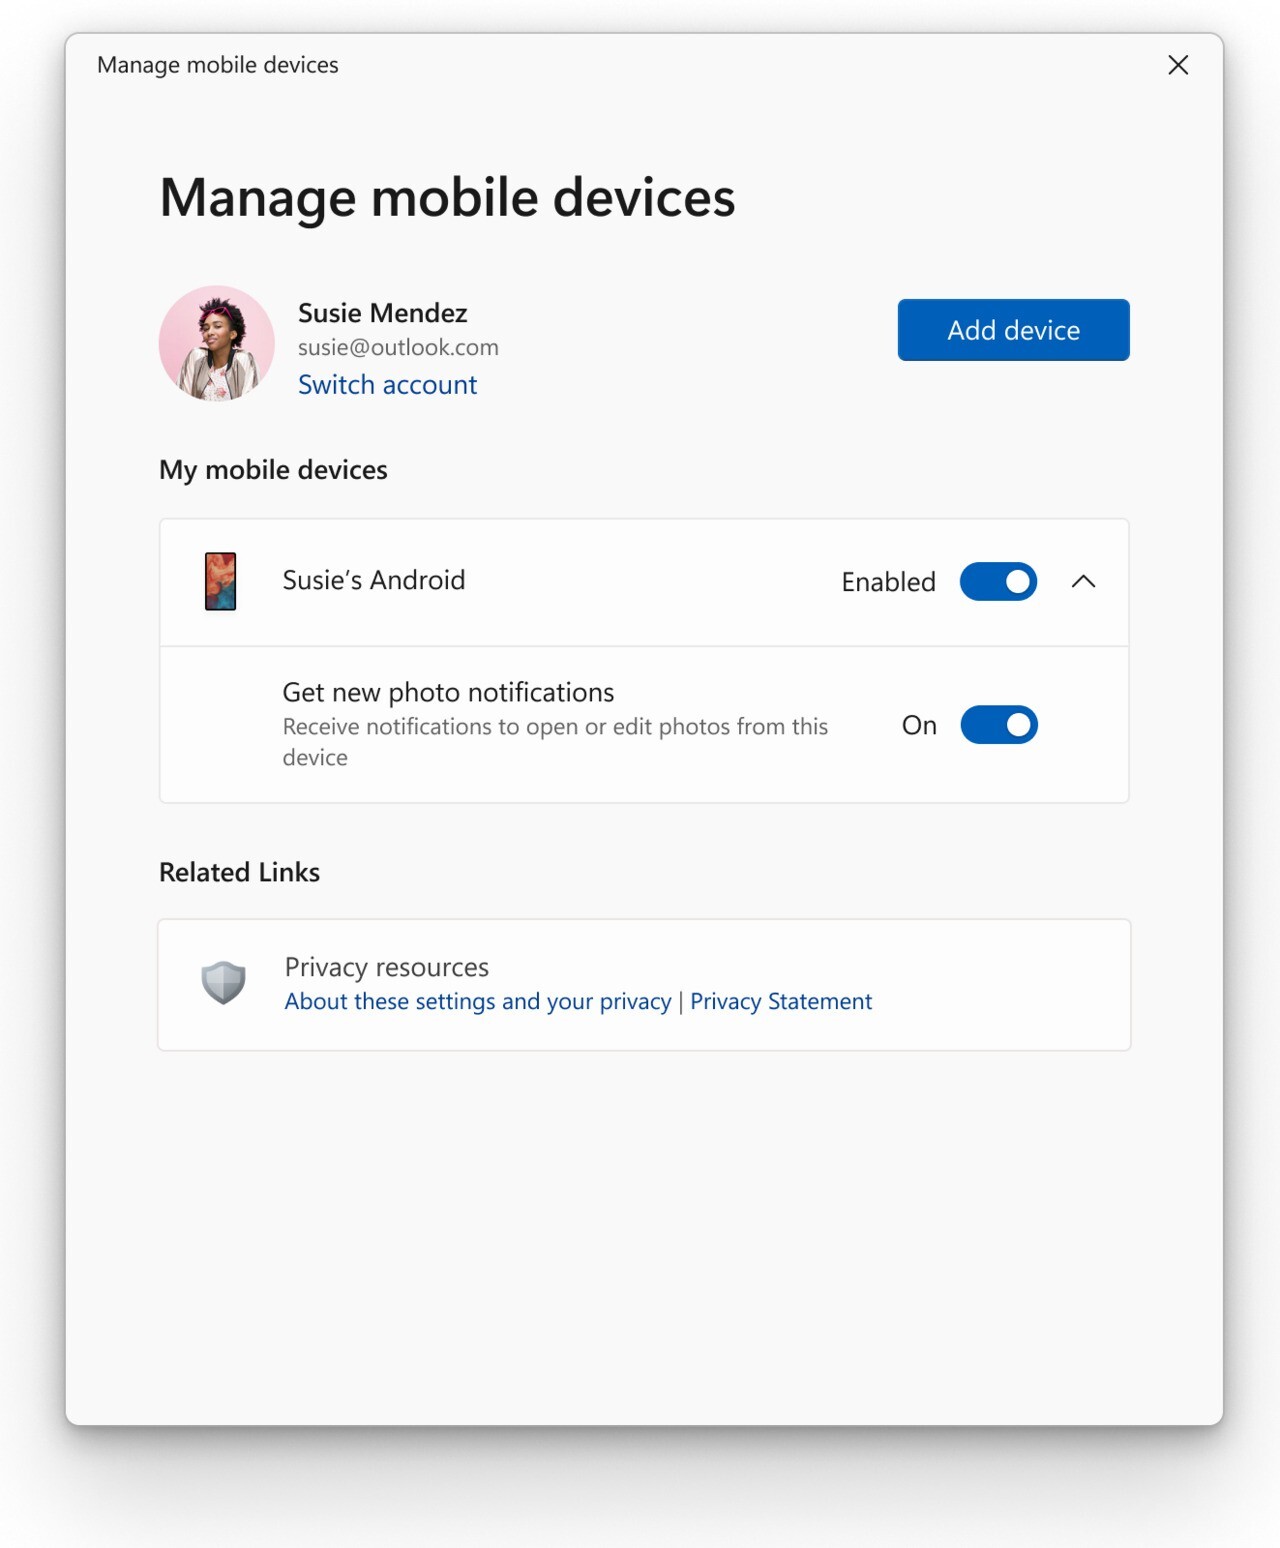 Manage mobile device settings